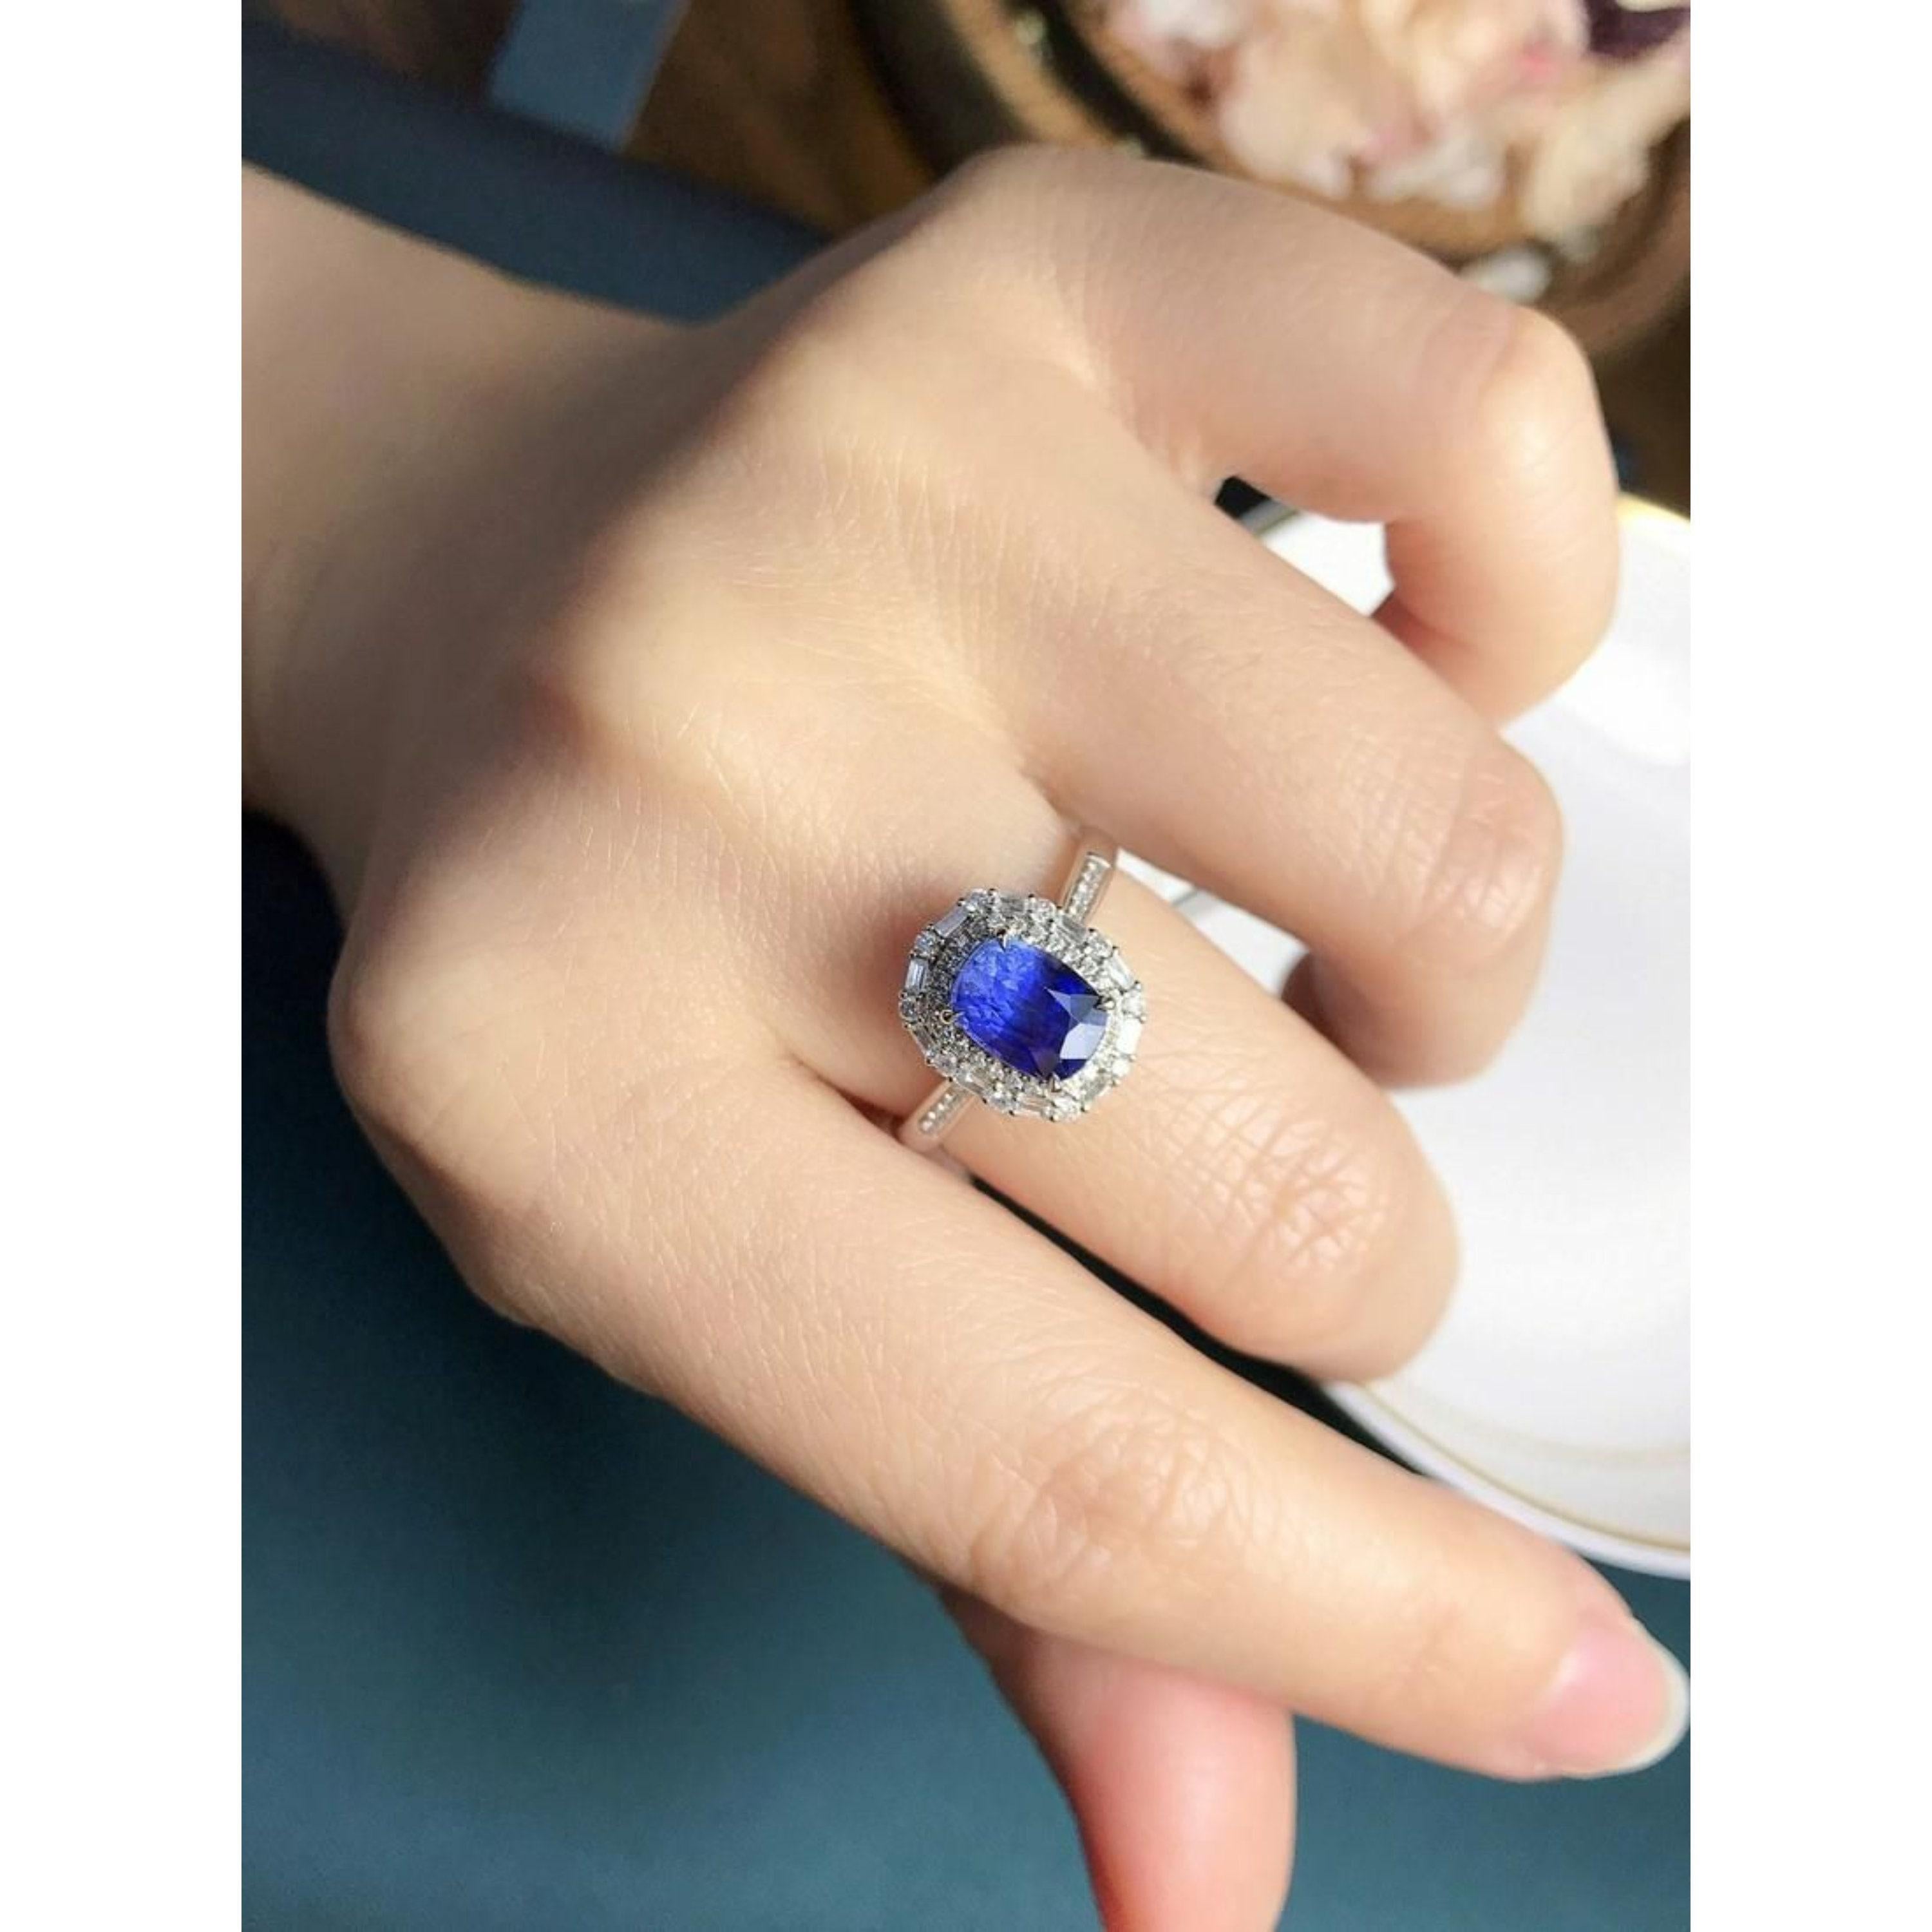 For Sale:  Natural Cushion Cut Sapphire Engagement Ring, Diamond Wedding Ring 3